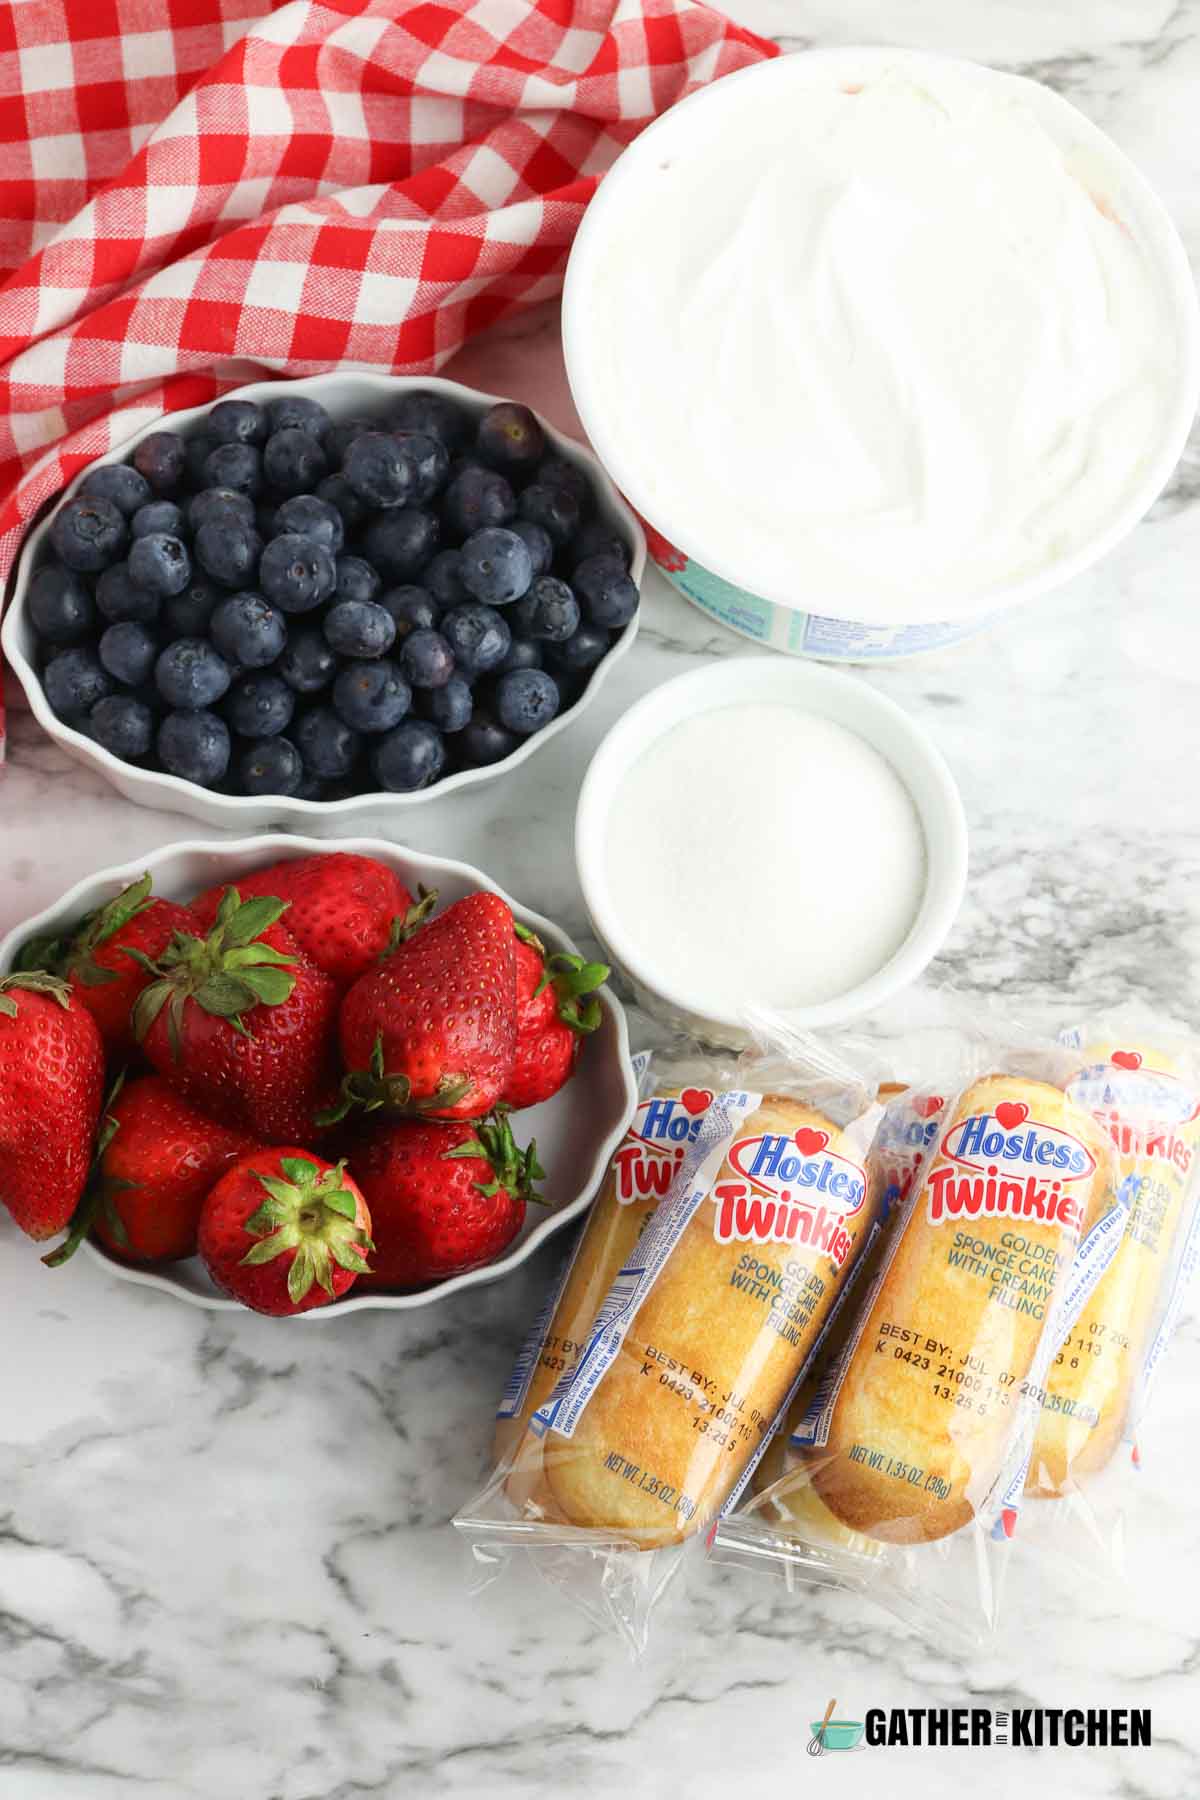 Ingredients for Twinkie shortcake: whipped topping, blueberries, sugar, strawberries and Twinkies.